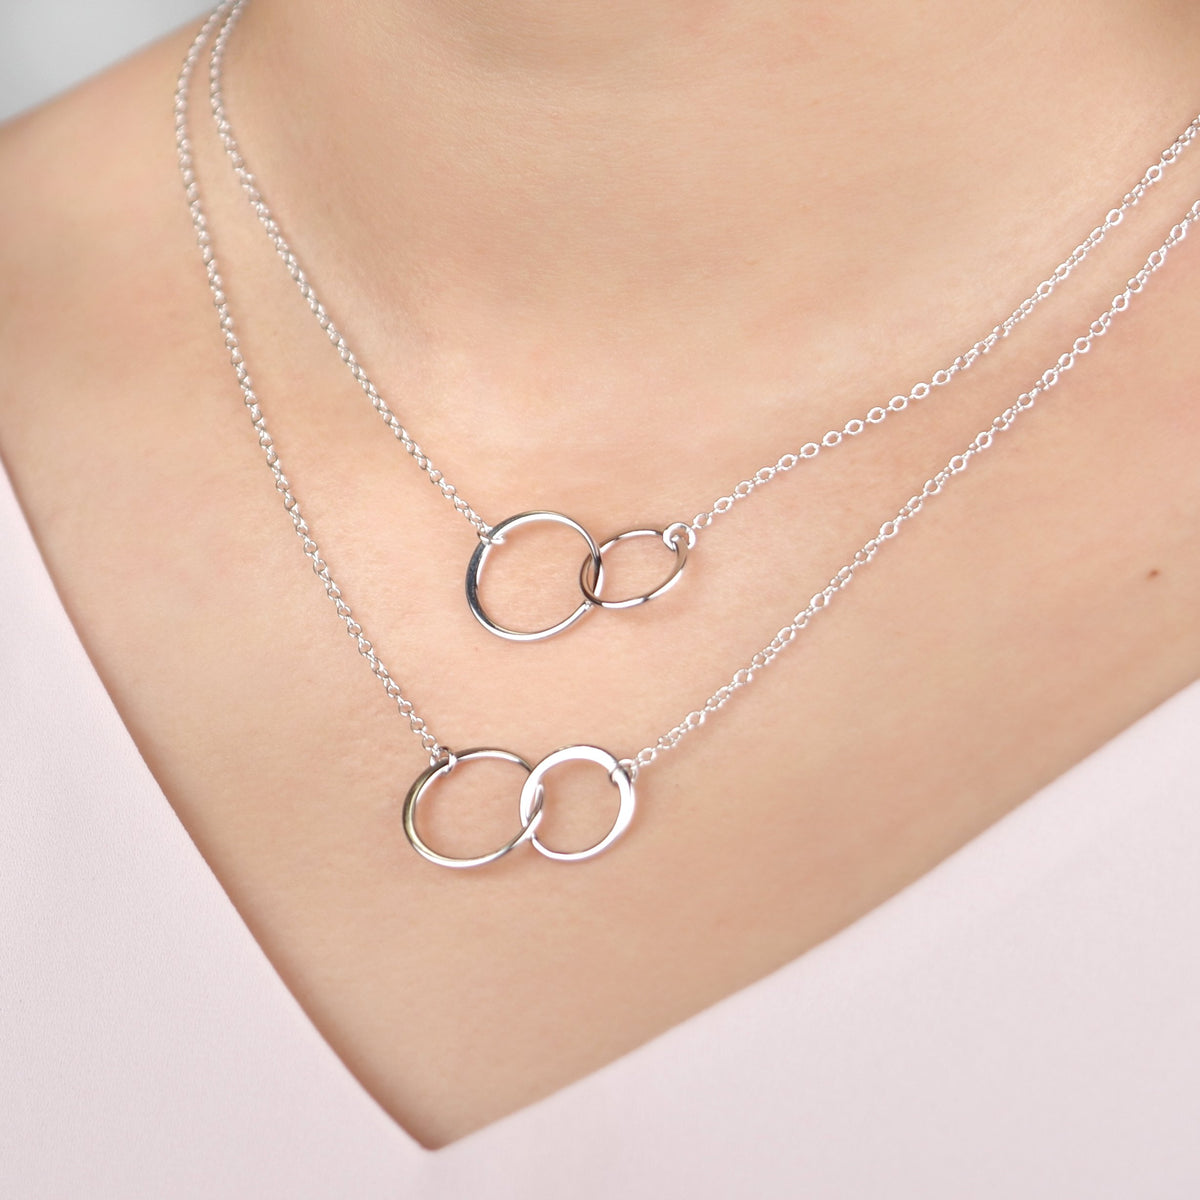 Godmother-Goddaughter Double Circles Necklace Set